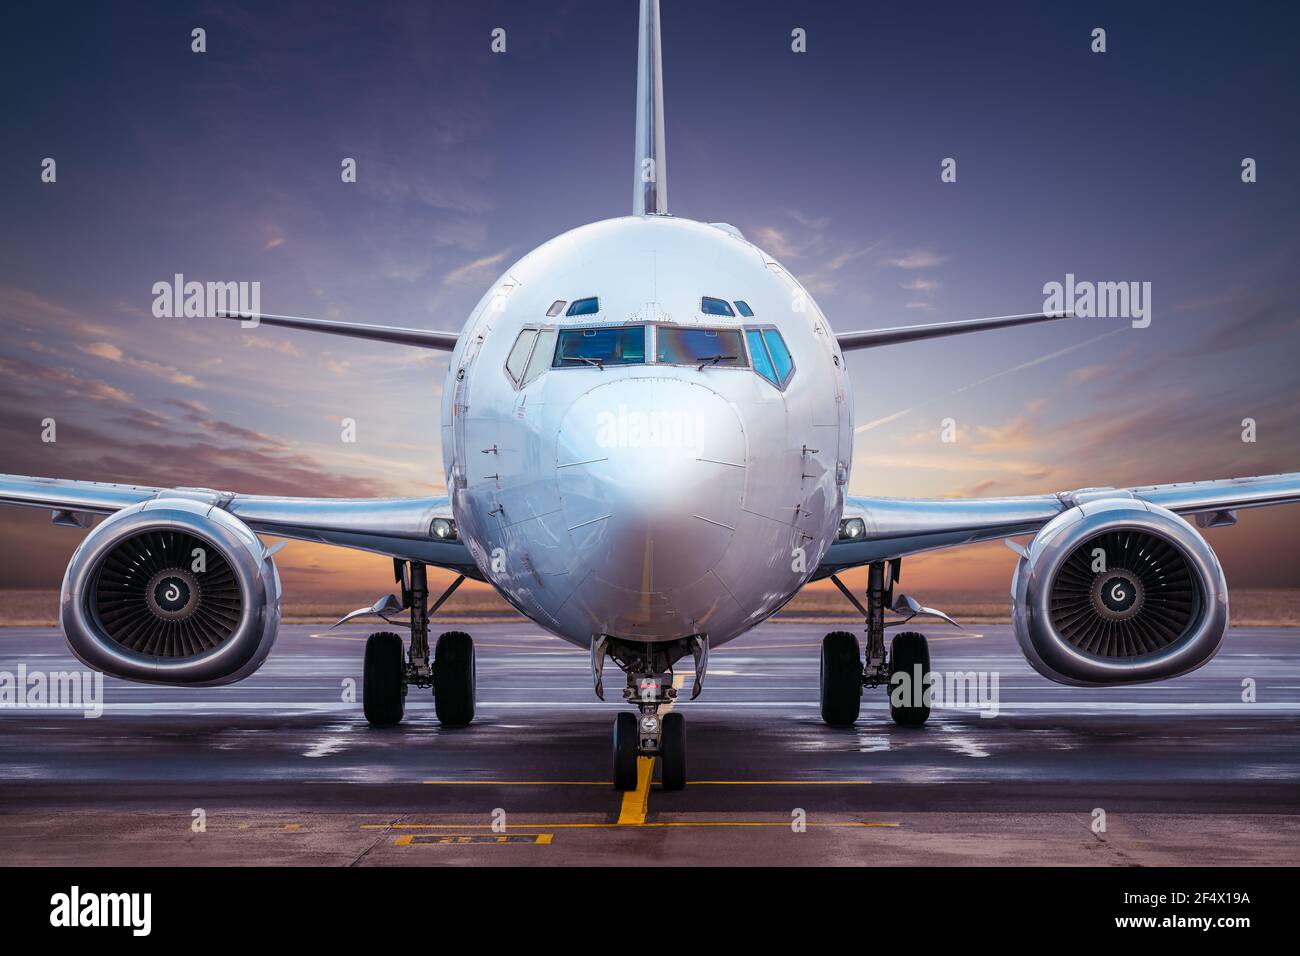 commercial airplane at an airfield against a sunset Stock Photo